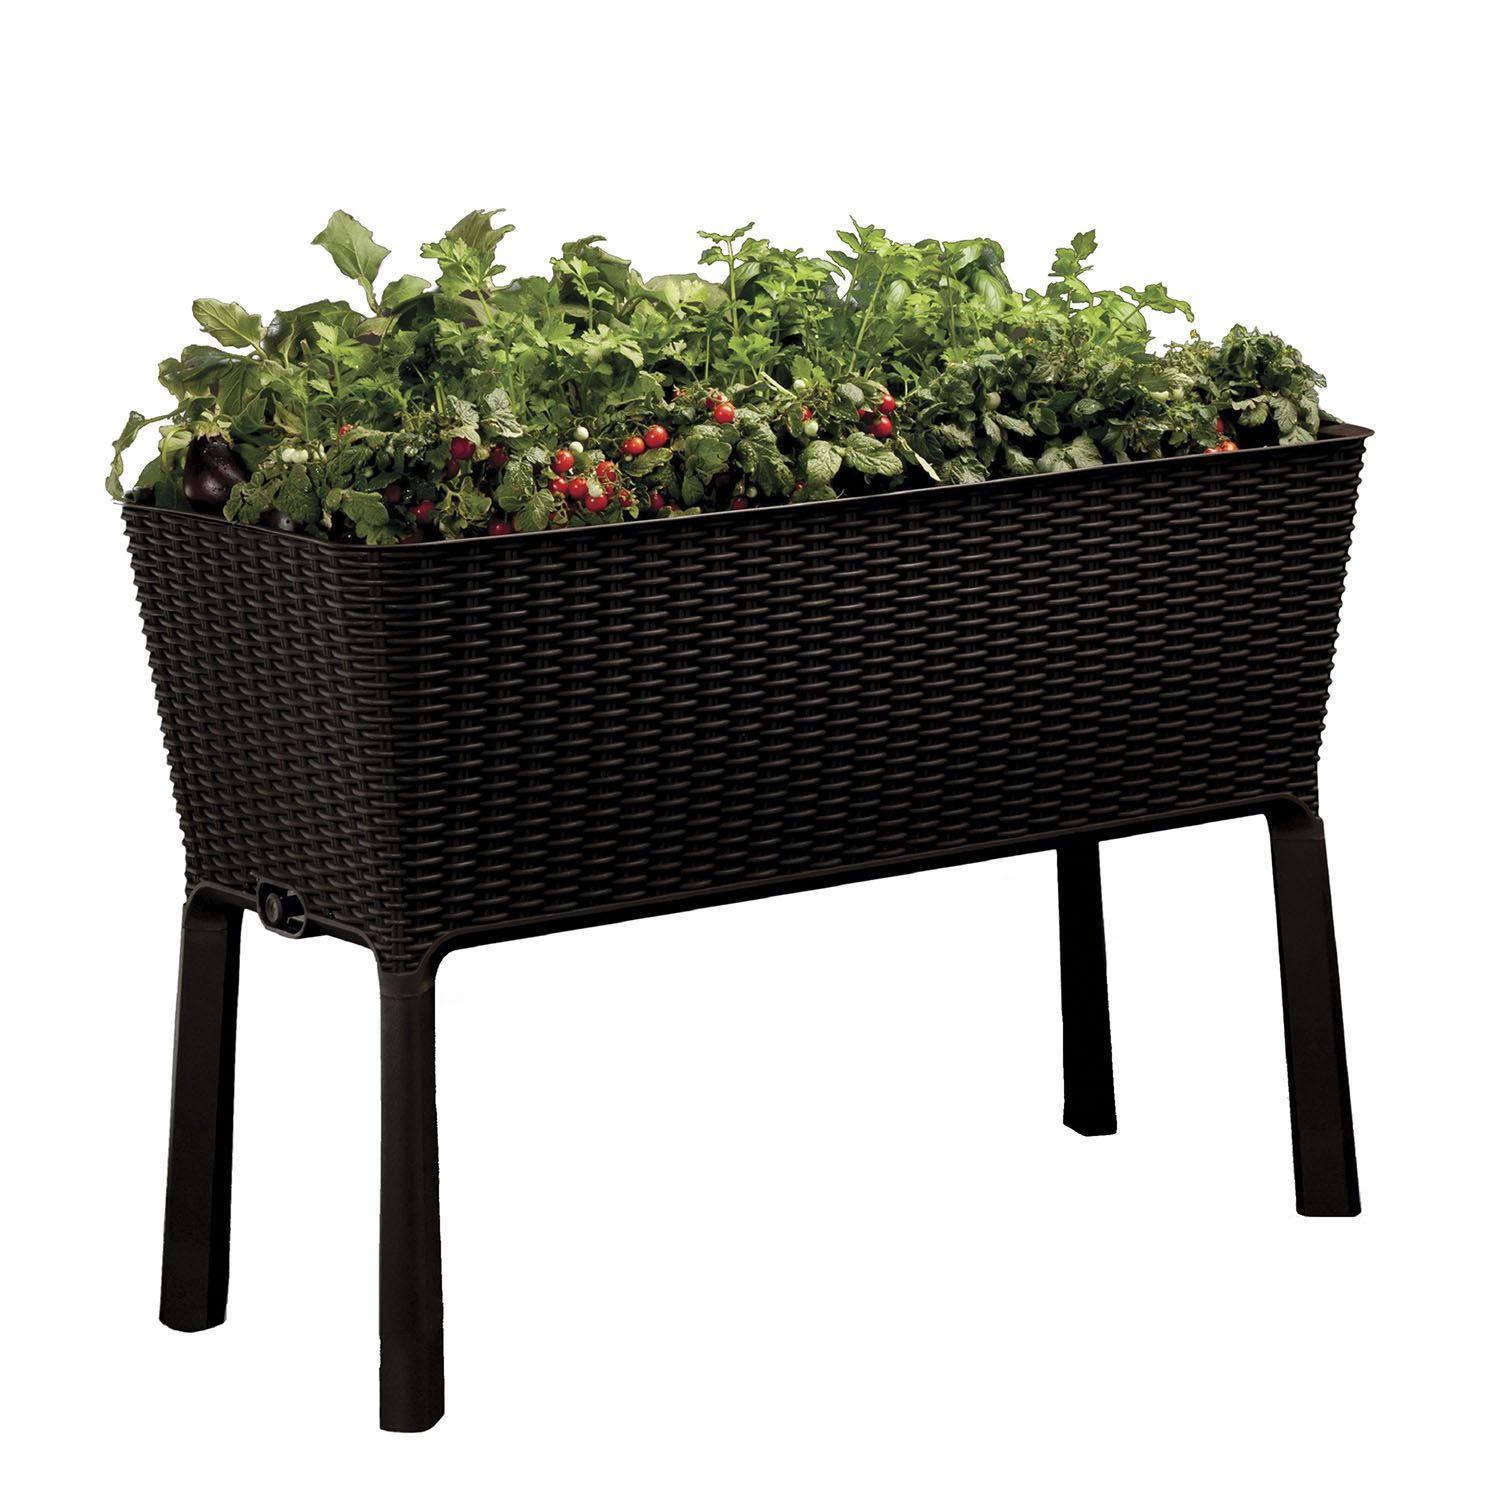 Keter Elevated Garden Bed with Dividers